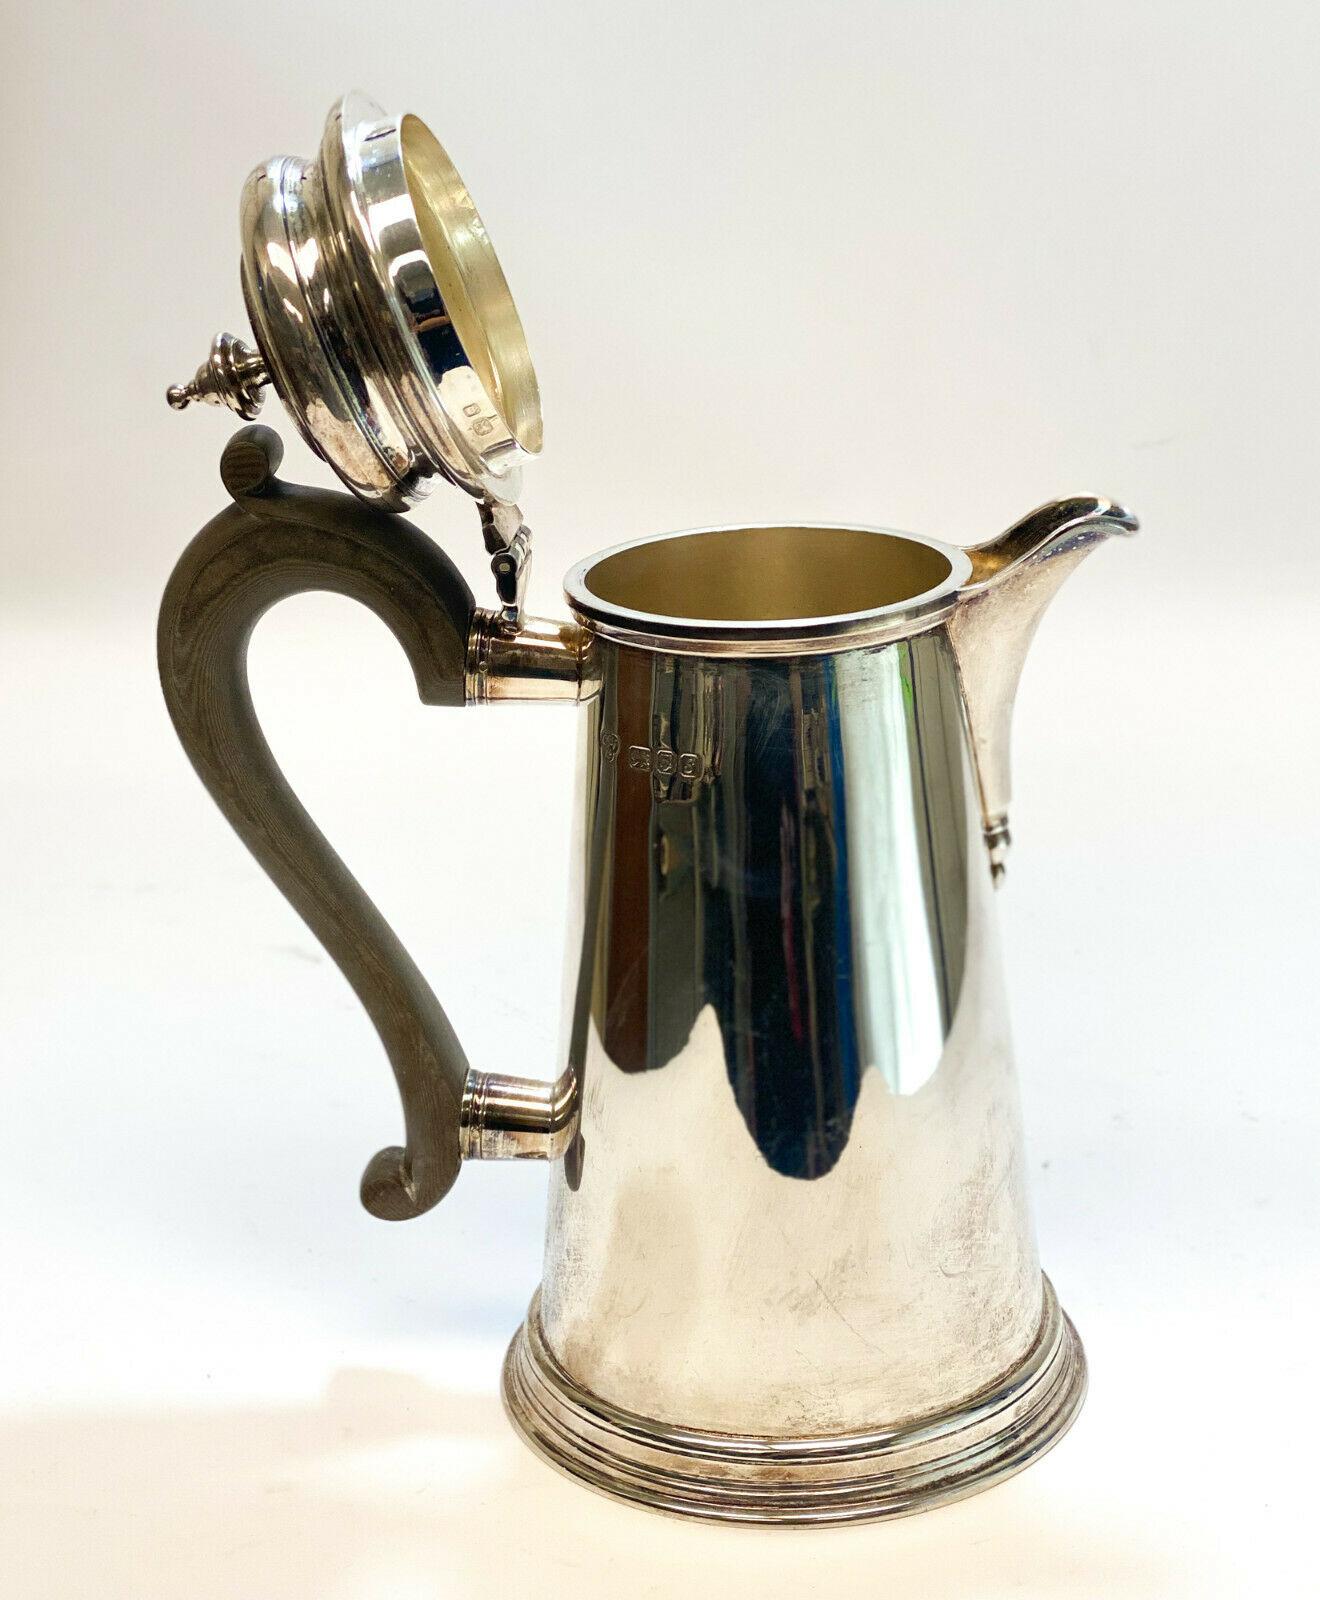 CJ Vander Ltd London Sterling Silver Georgian Style Tea Coffee Pot, 1973

Wooden Handle. CJ Vander Sterling silver hallmarks to the side and interior of the rim.

Additional Information:
Composition: Sterling Silver	
Age: Post-1940
Weight: 21.93